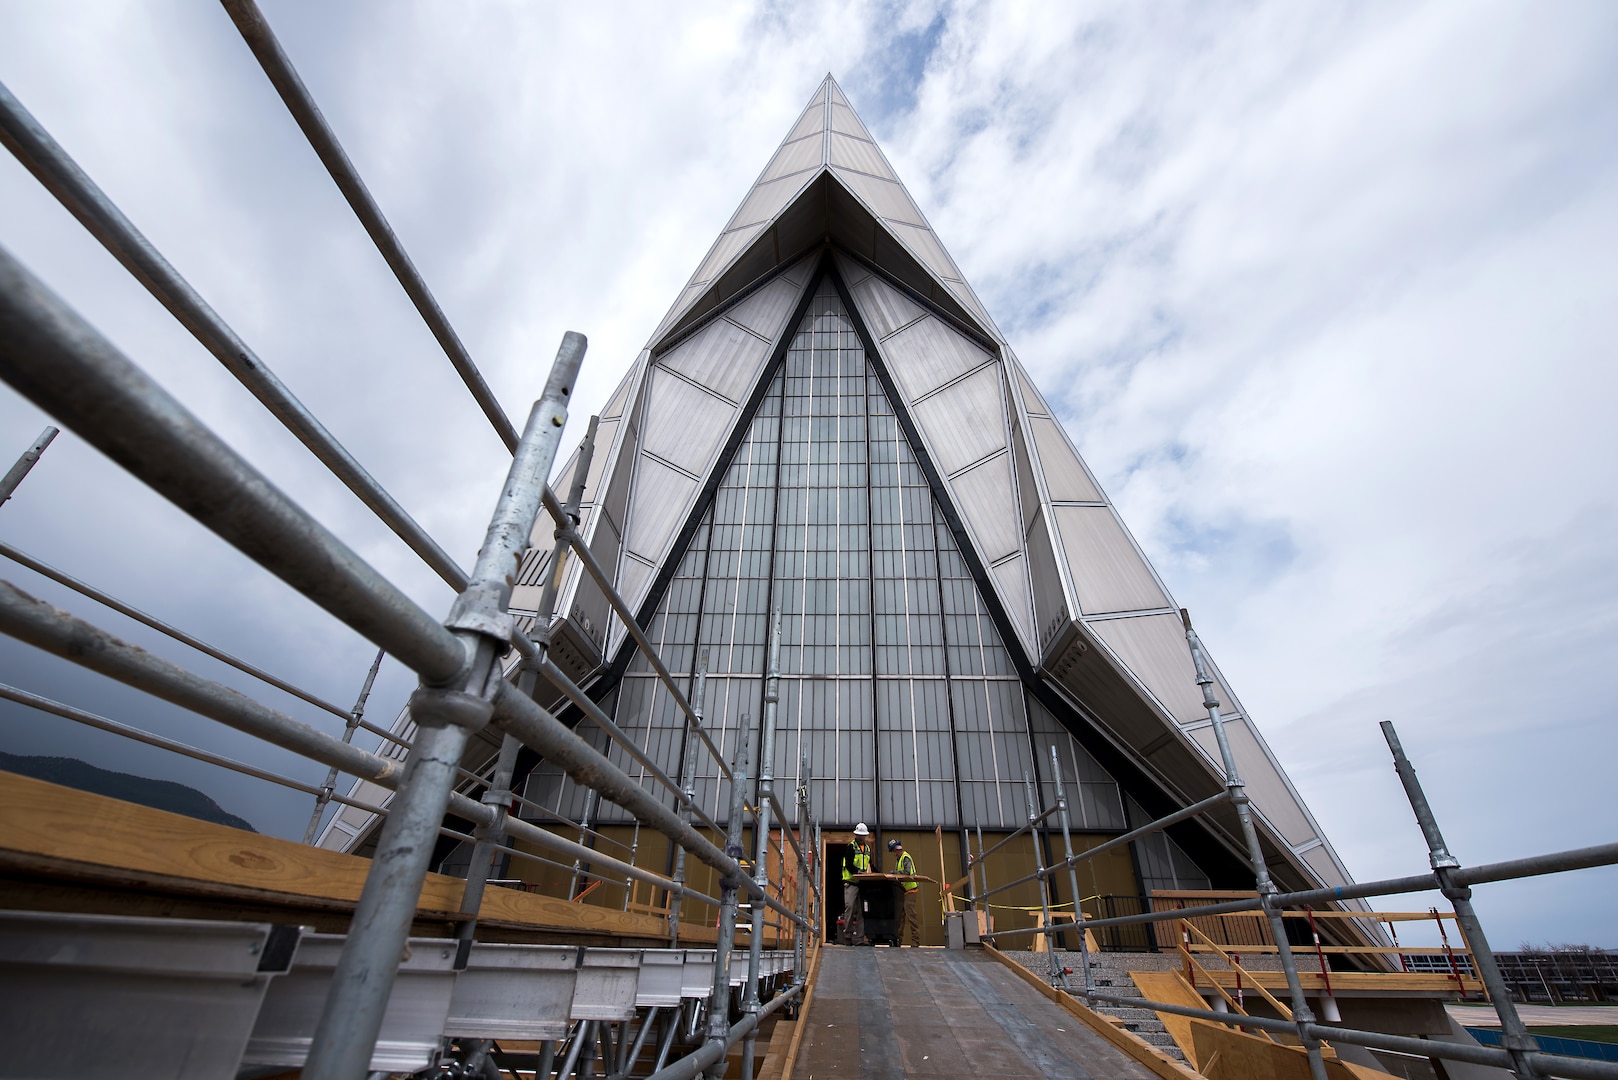 Construction crews continue initial steps of renovation at the U. S. Air Force Academy Cadet Chapel in Colorado Springs, Colorado, May 11, 2020.